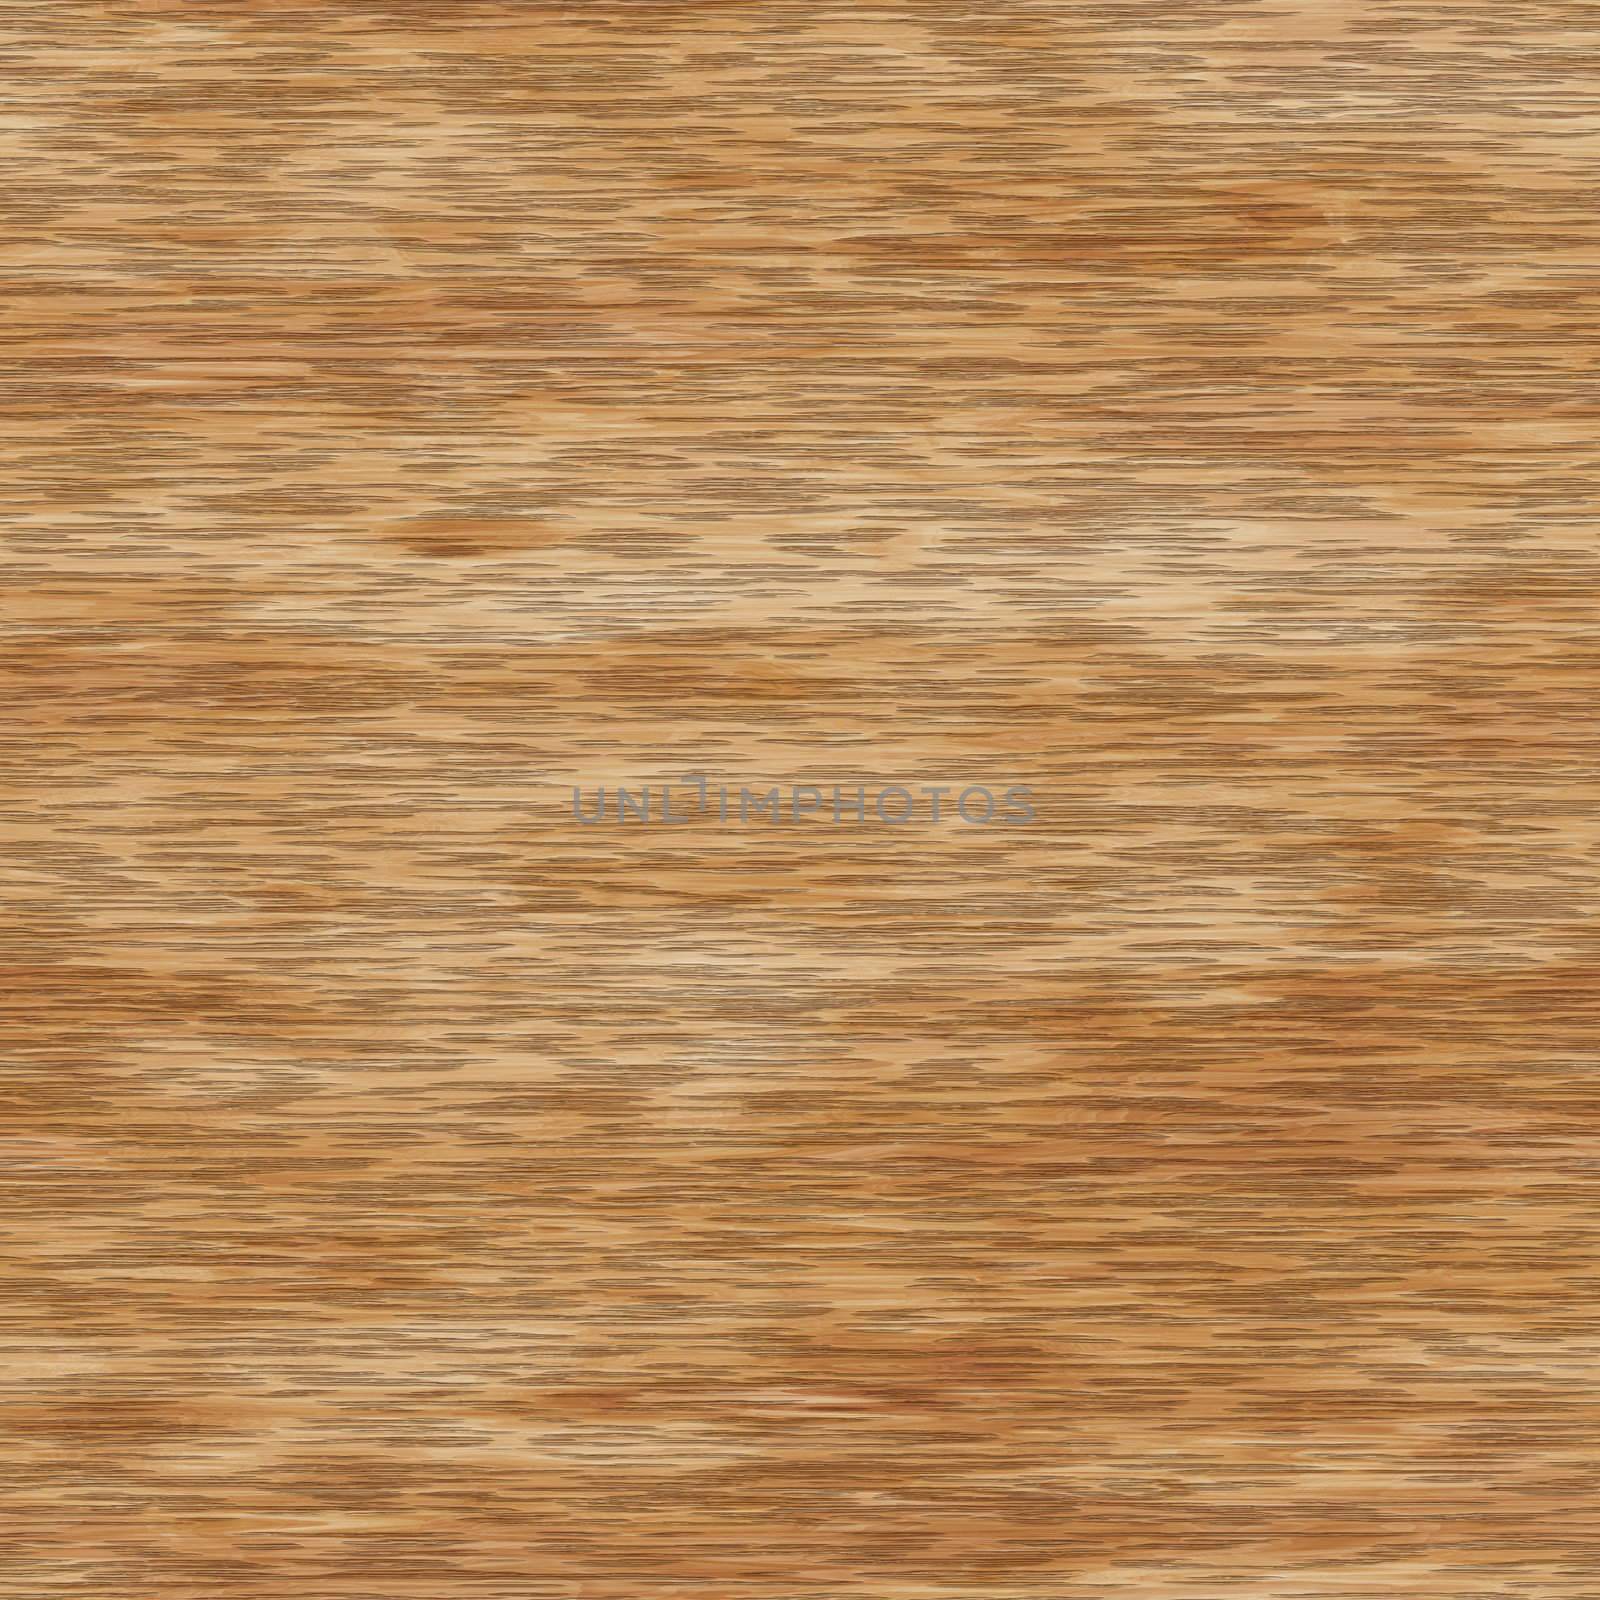 Seamless Wood Texture in a Grainy Brown